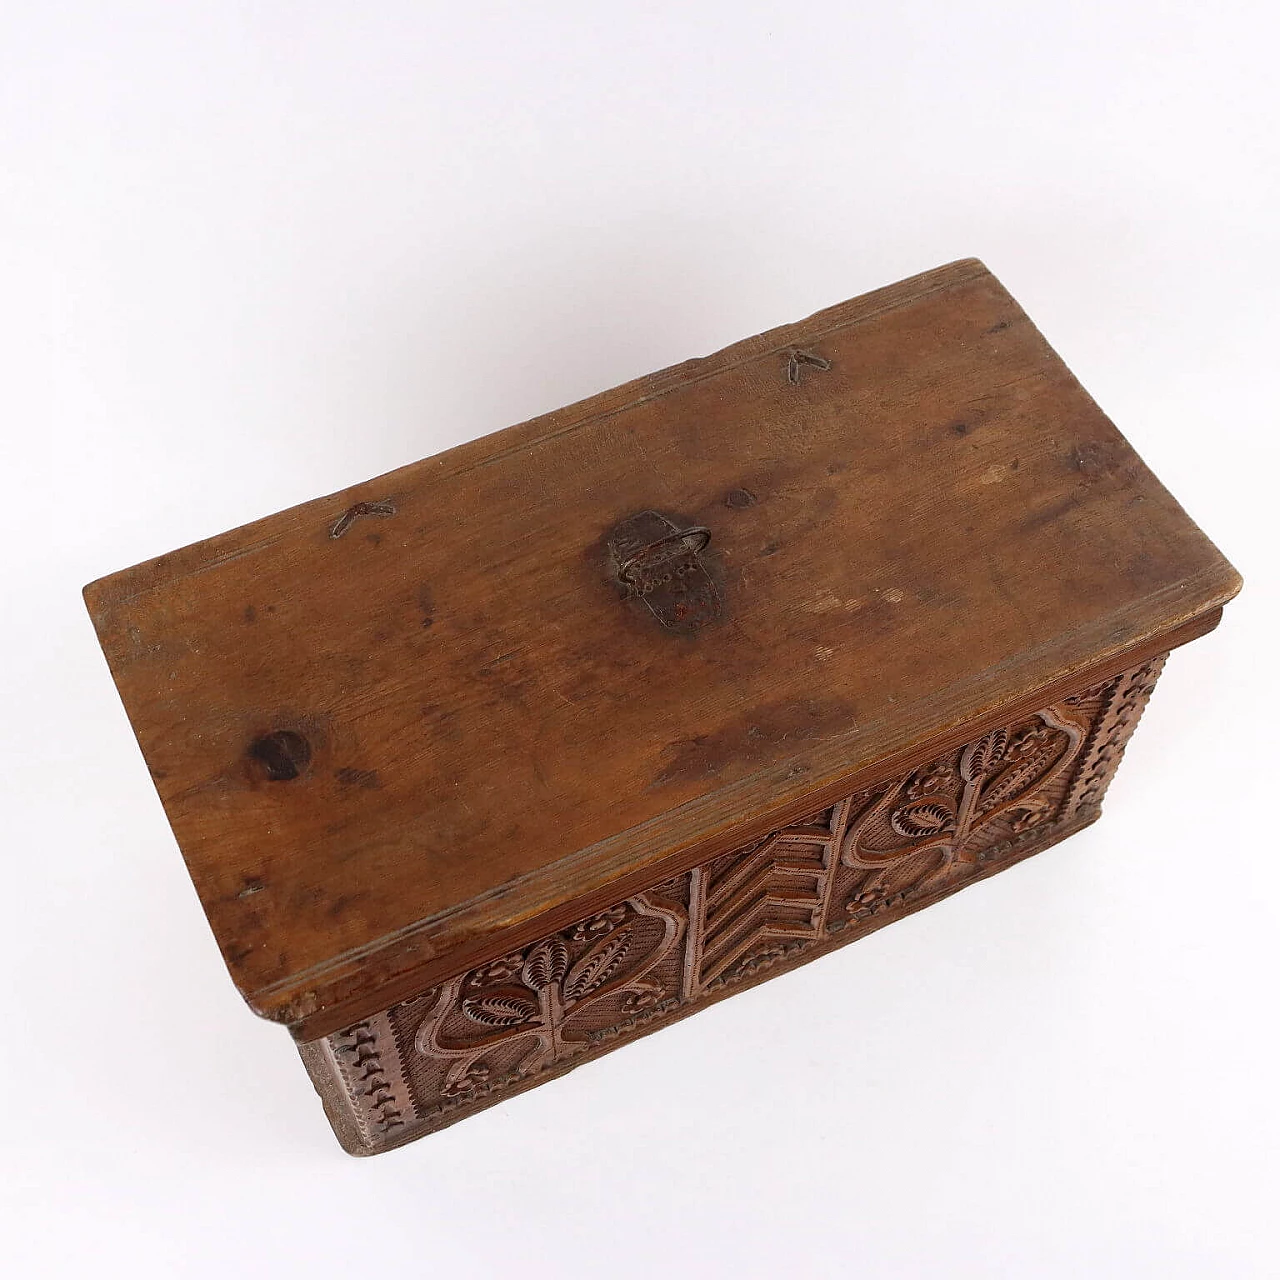 Late Renaissance box in swiss pine and maple, early 17th century 9